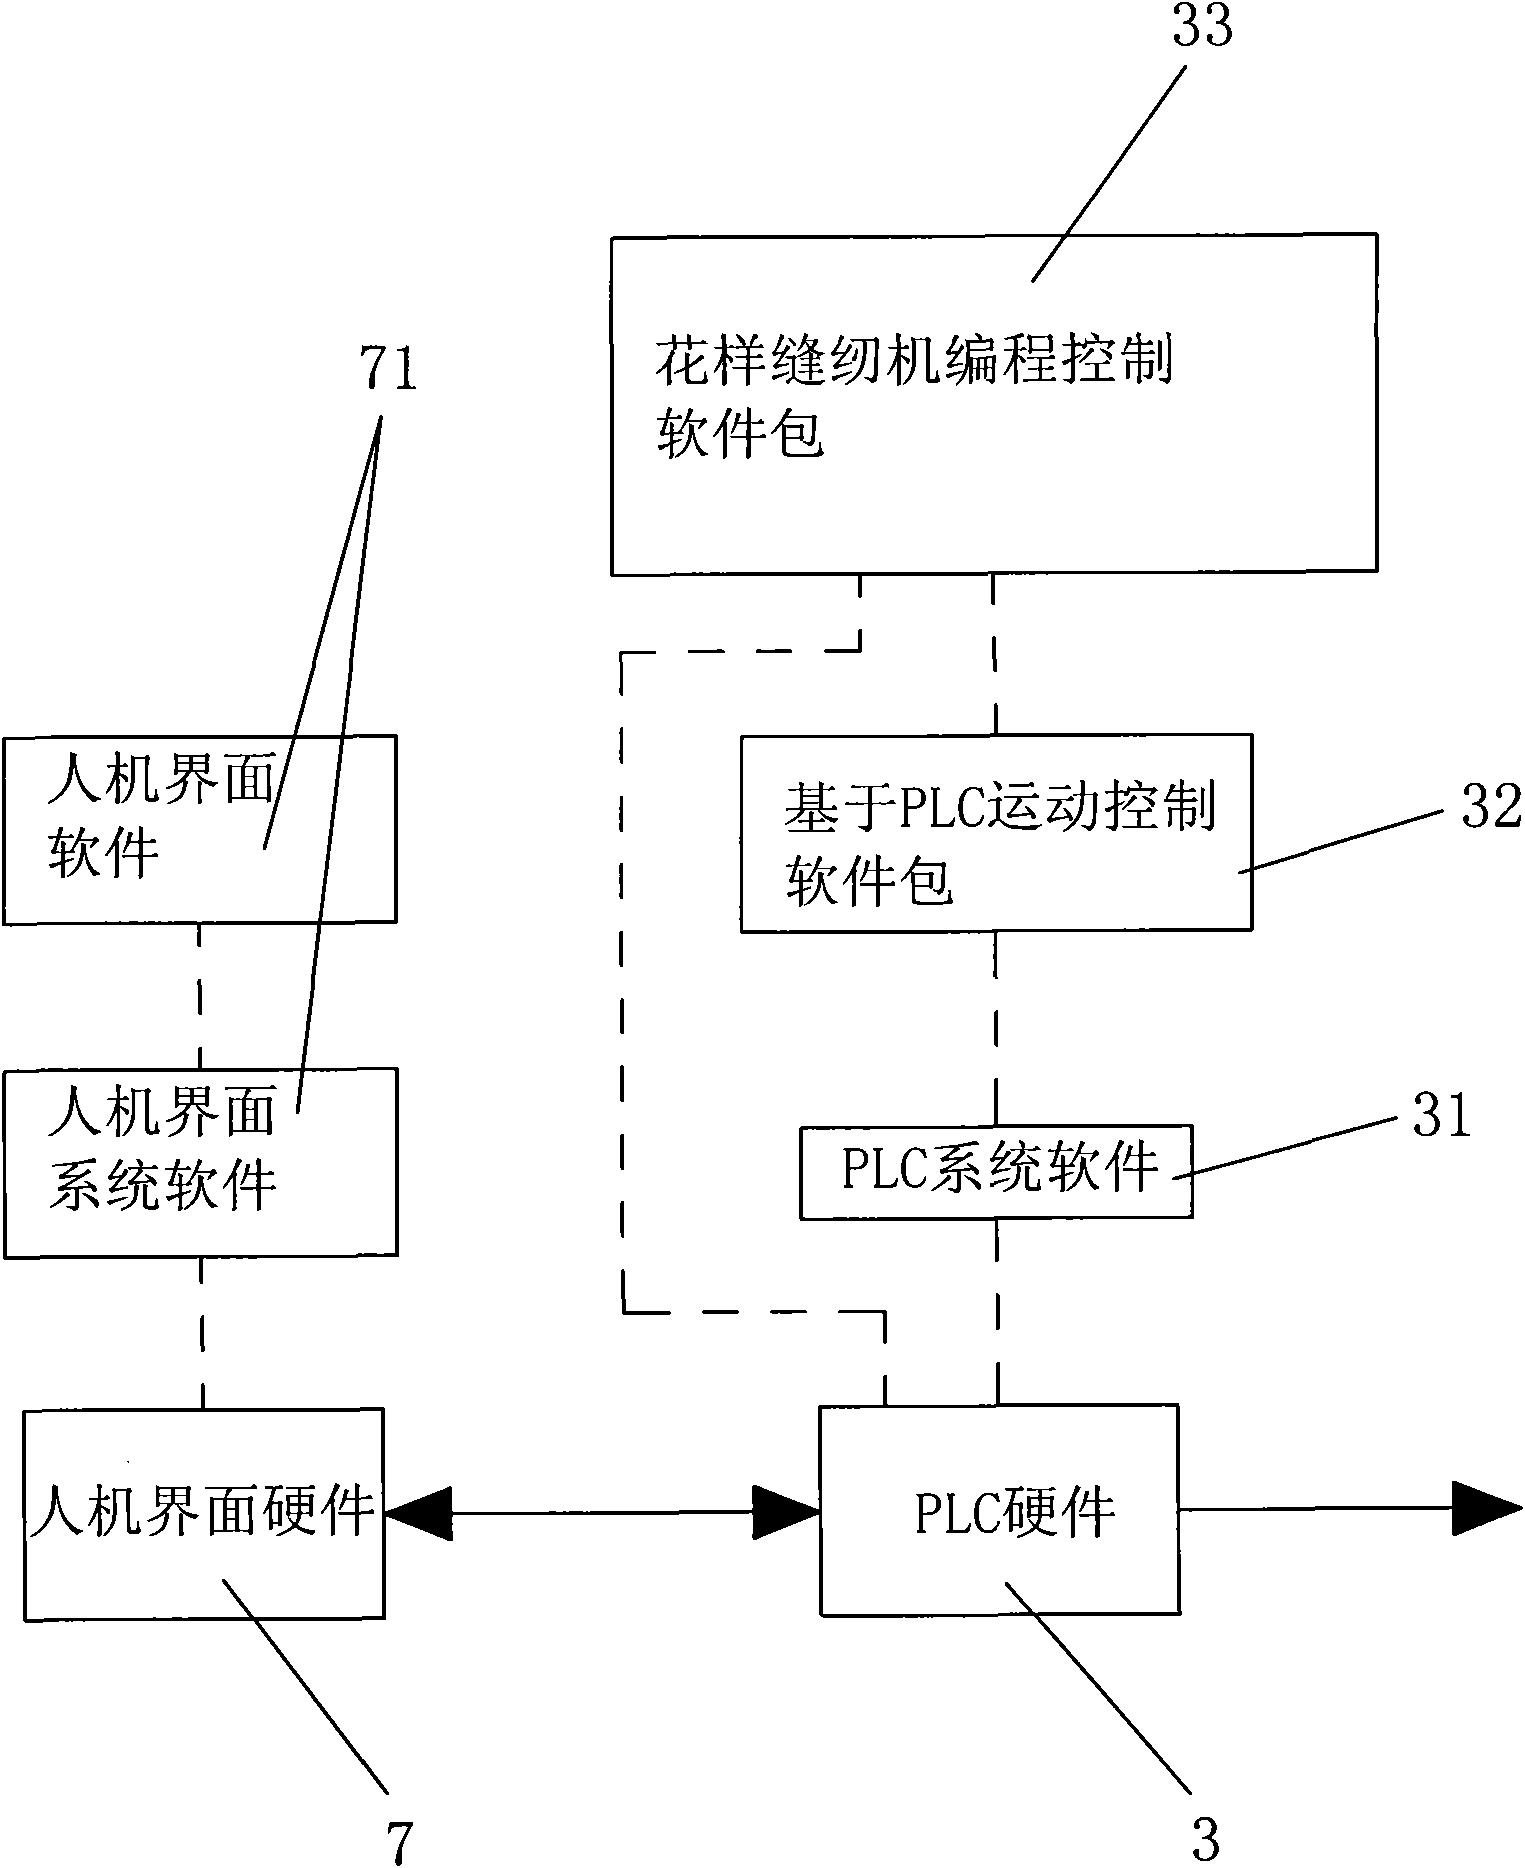 Programming control system of pattern sewing machine based on PLC (Programmable Logic Controller)